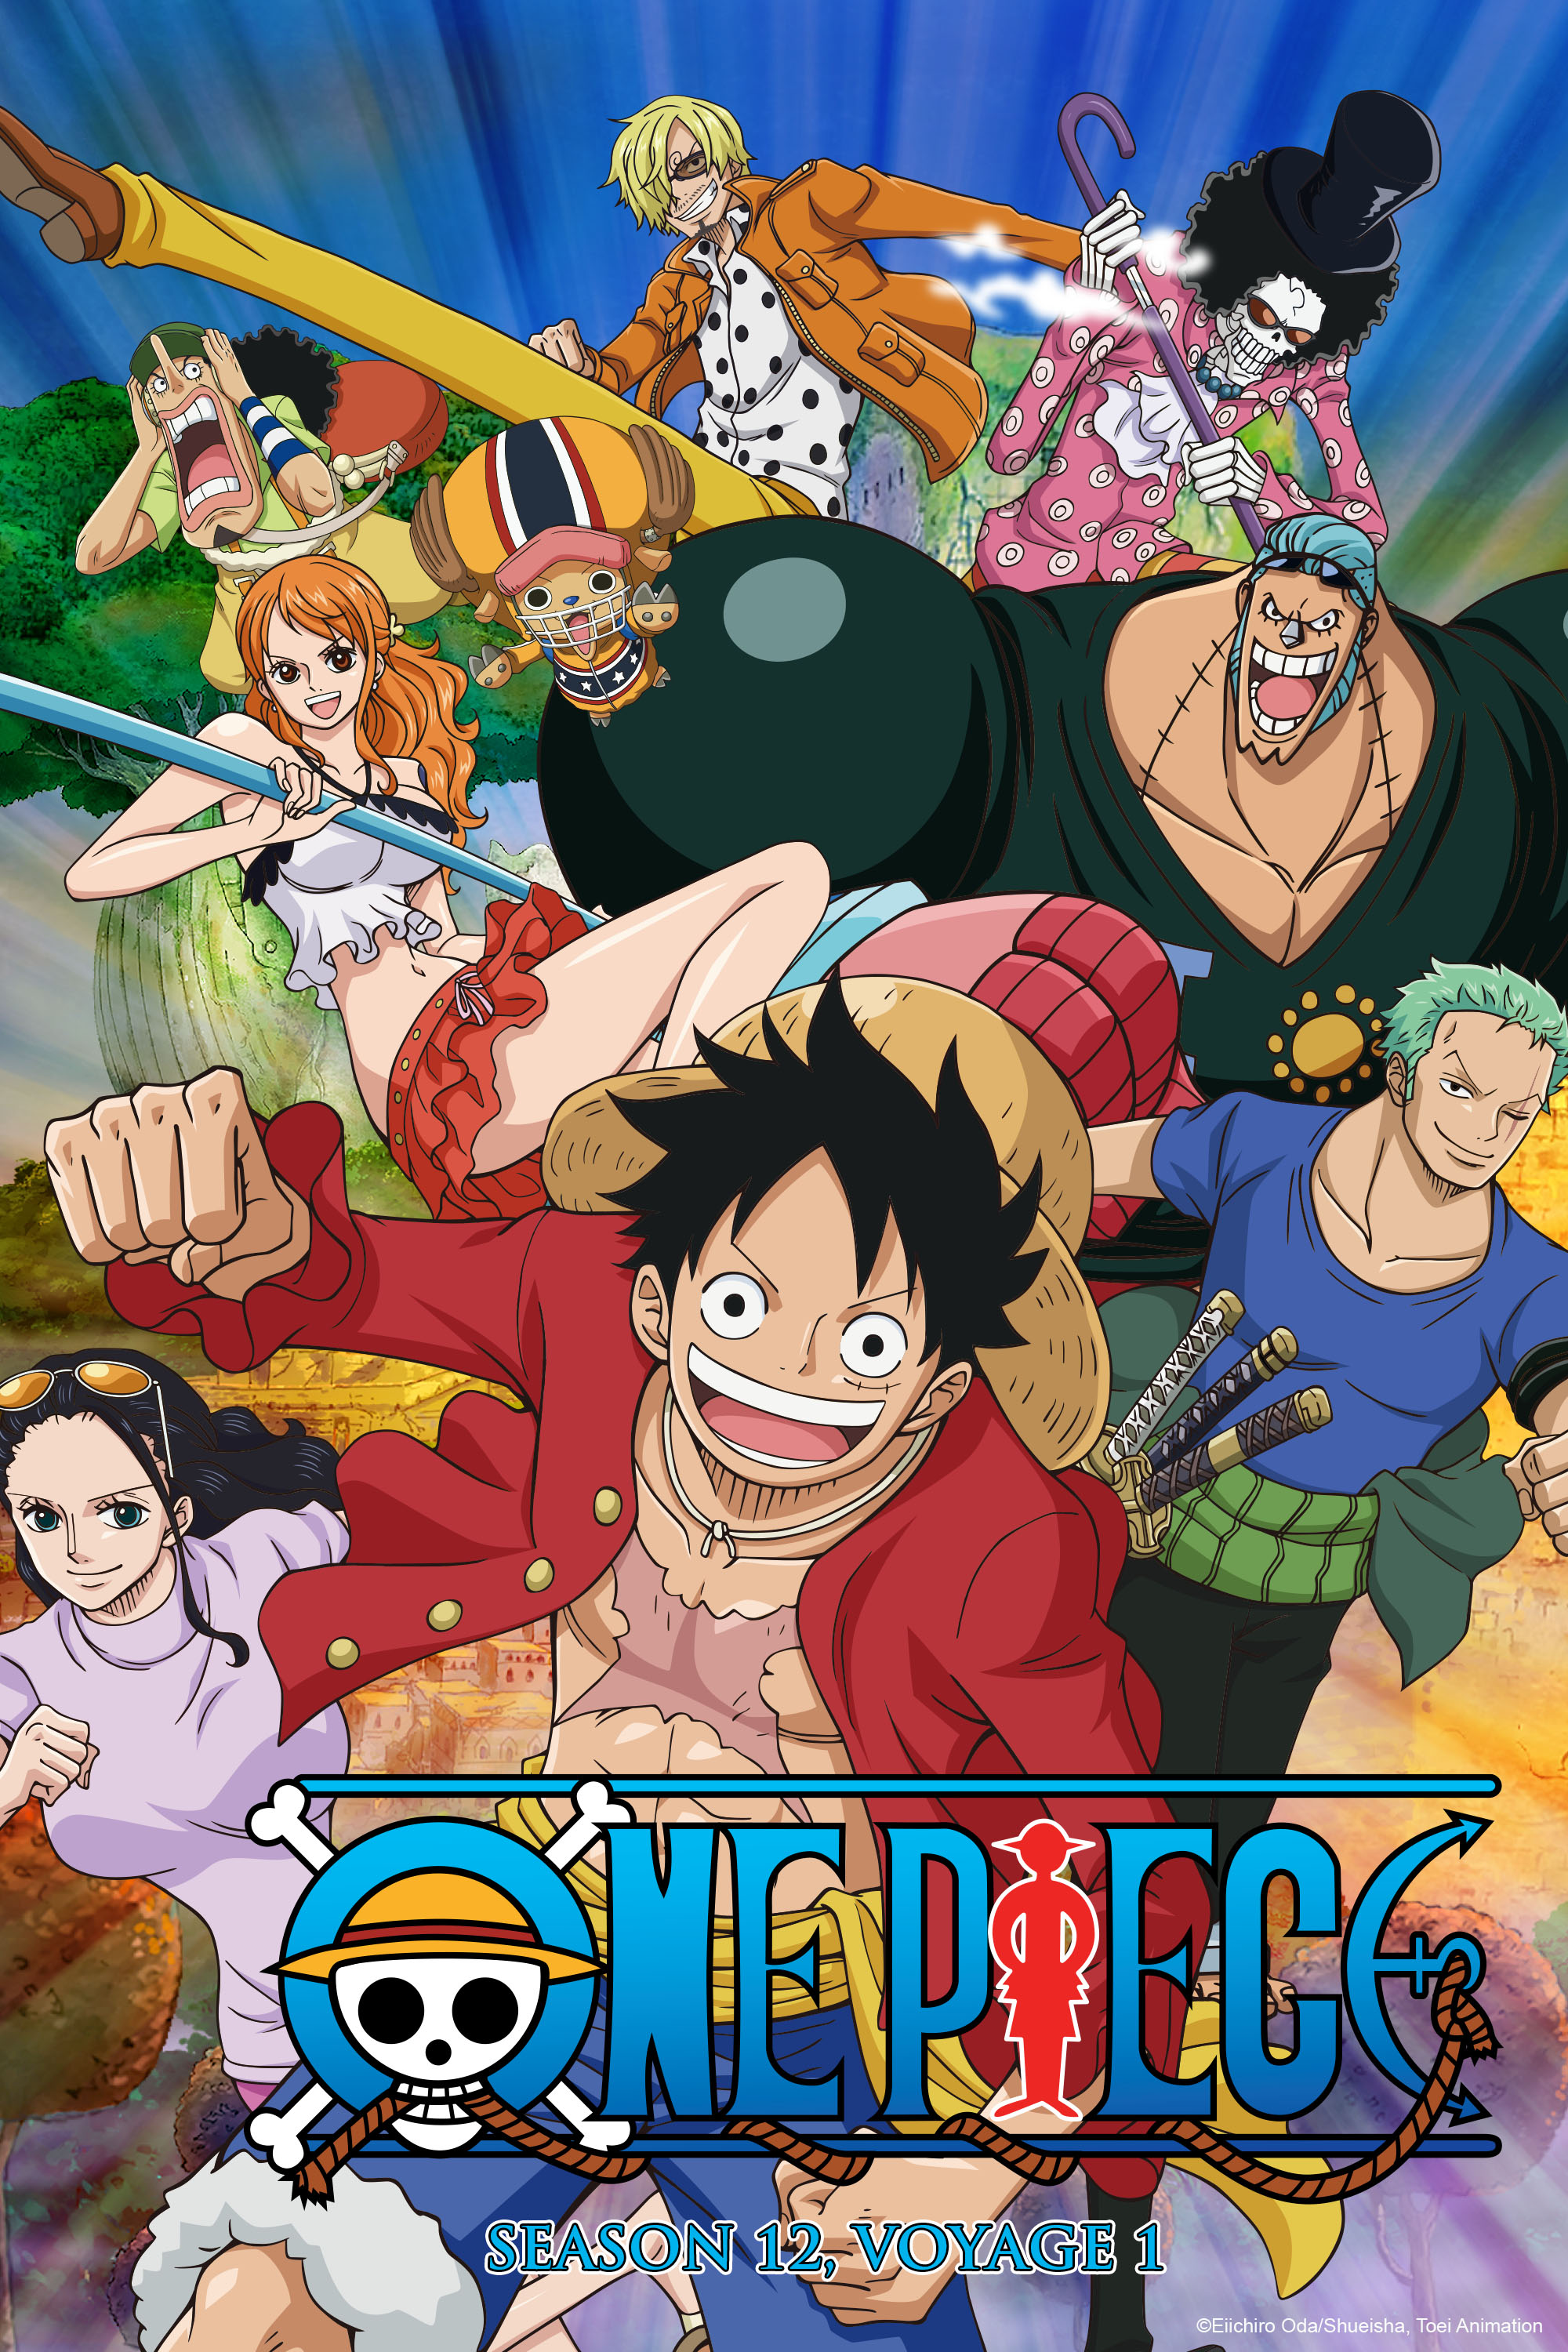 ANIMATION OF ONE PIECE  on Twitter  One piece episodes, Anime, One piece  pictures